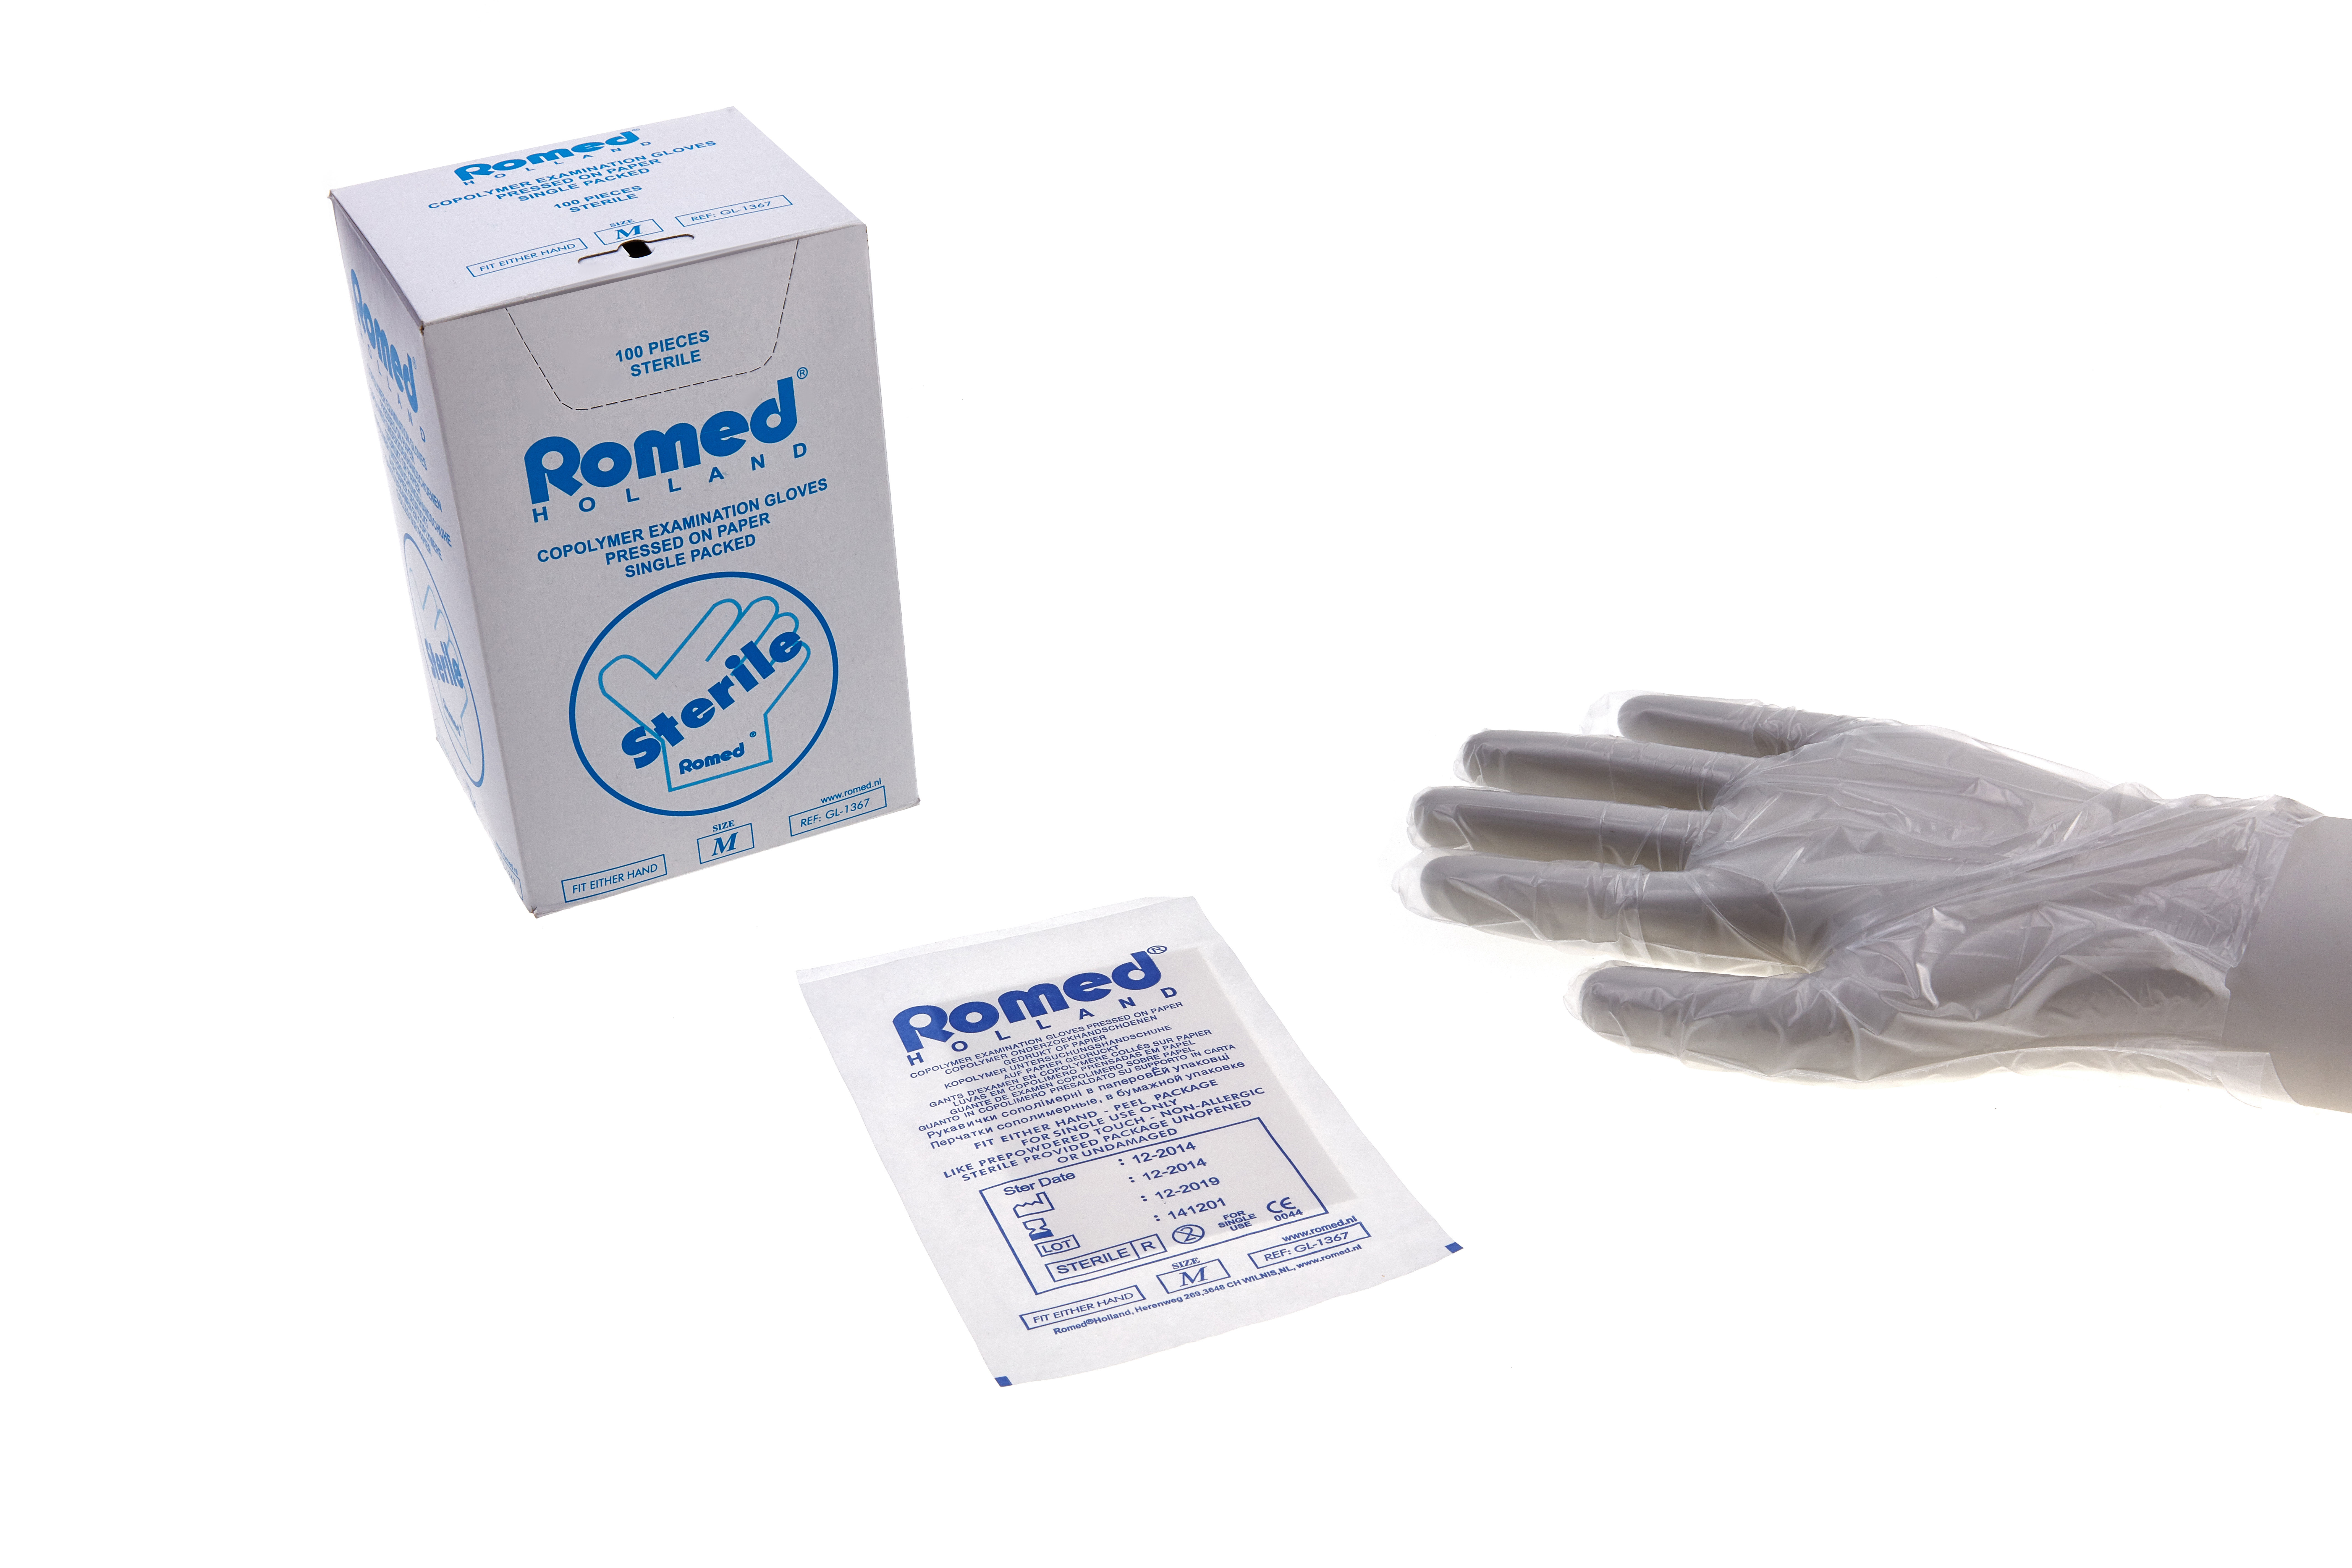 GL-1367 Romed copolymer examination gloves, medium, sterile per piece, pressed on paper, 100 pcs in an inner box, 24 x 100 pcs = 2.400 pcs in a carton.